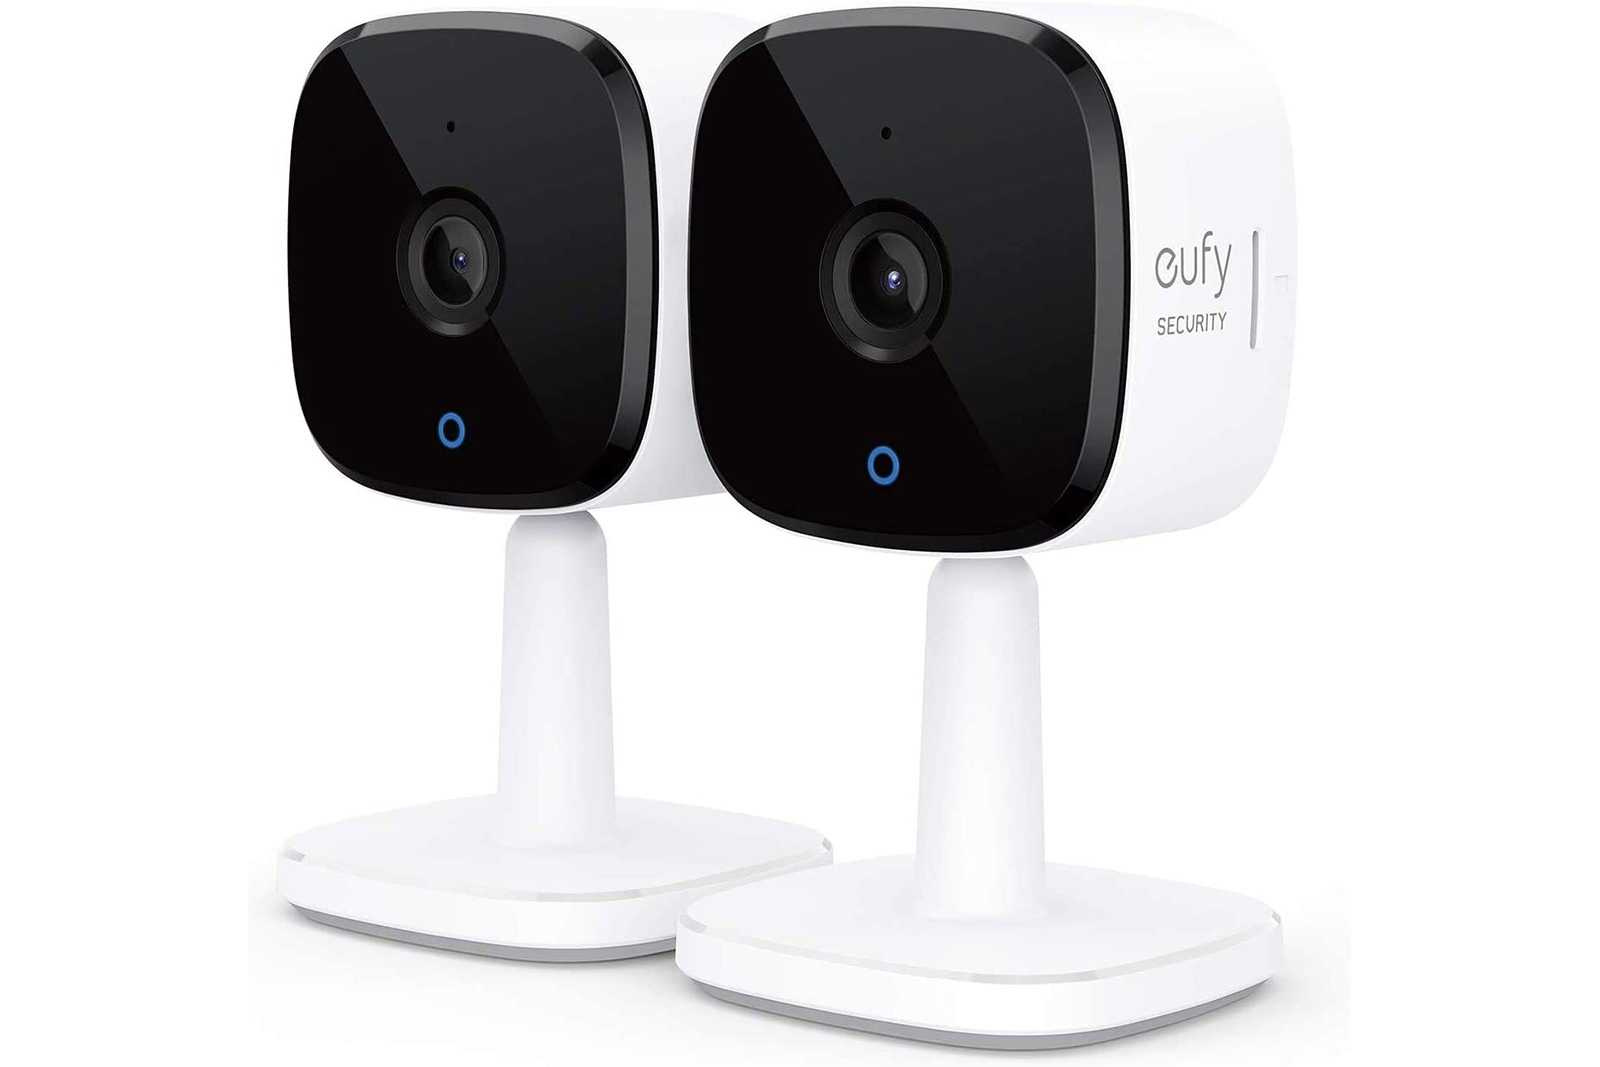 A bug let Eufy security camera owners access strangers' feeds